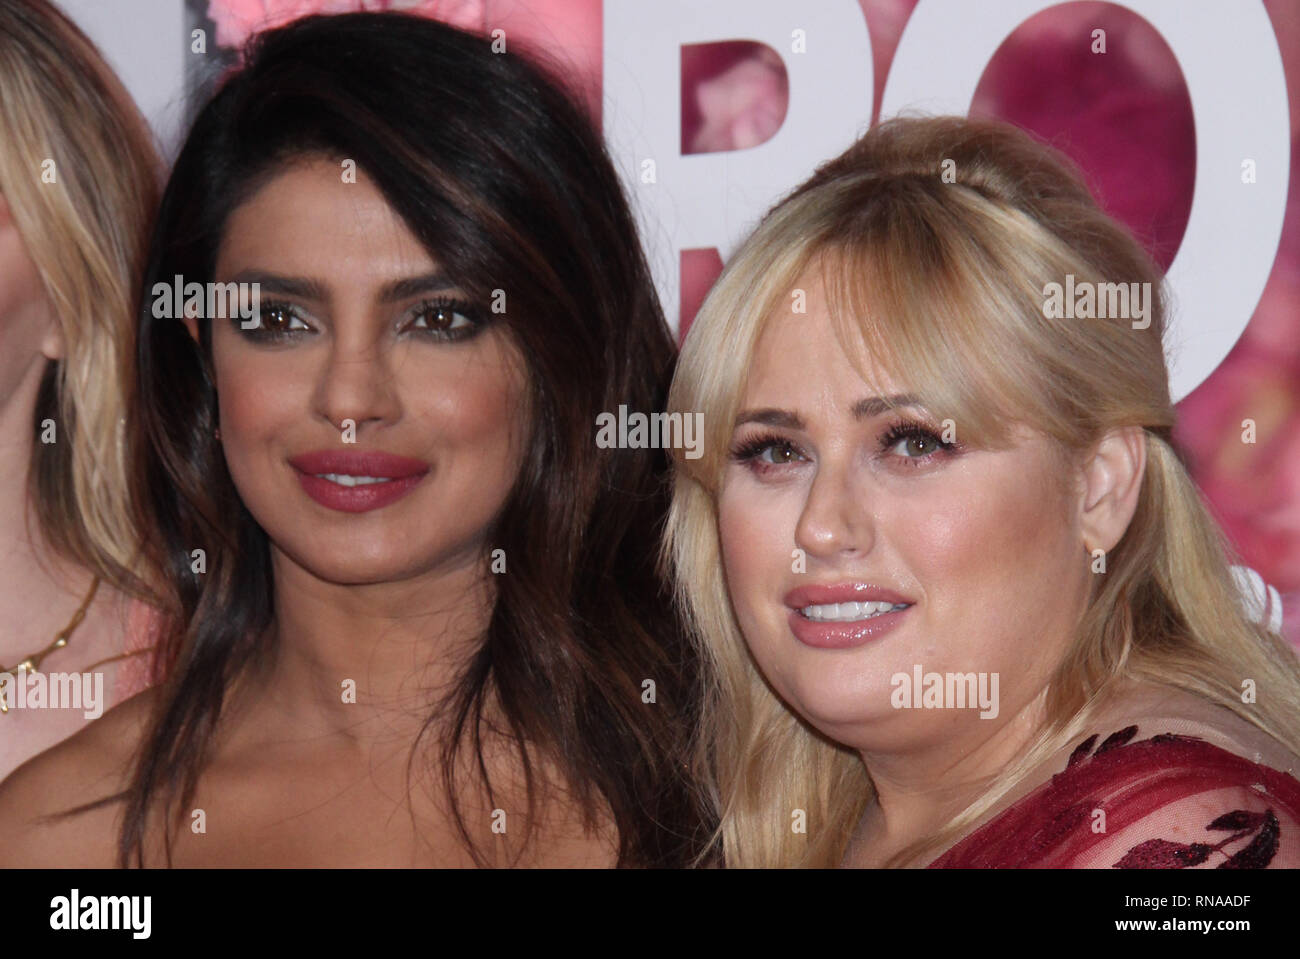 Priyanka Chopra, Rebel Wilson  02/11/2019 The World Premiere of 'Isn't It Romantic' held at the Theatre at Ace Hotel in Los Angeles, CA  Photo: Cronos/Hollywood News Stock Photo